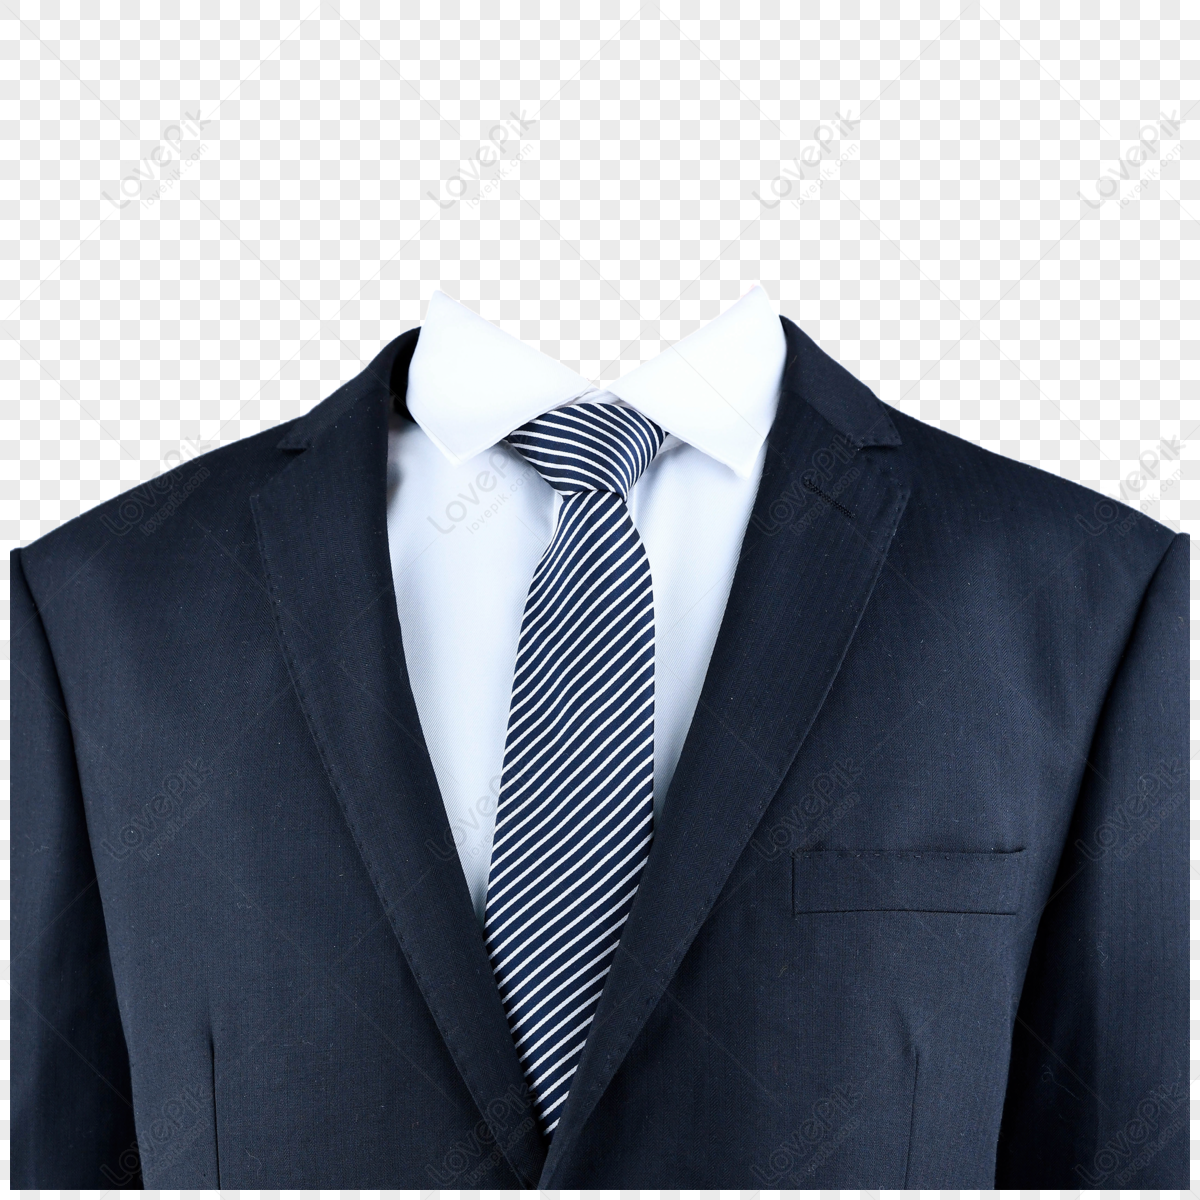 Bust Black Suit White Shirt Has Tie Photography,black And White,cloth ...